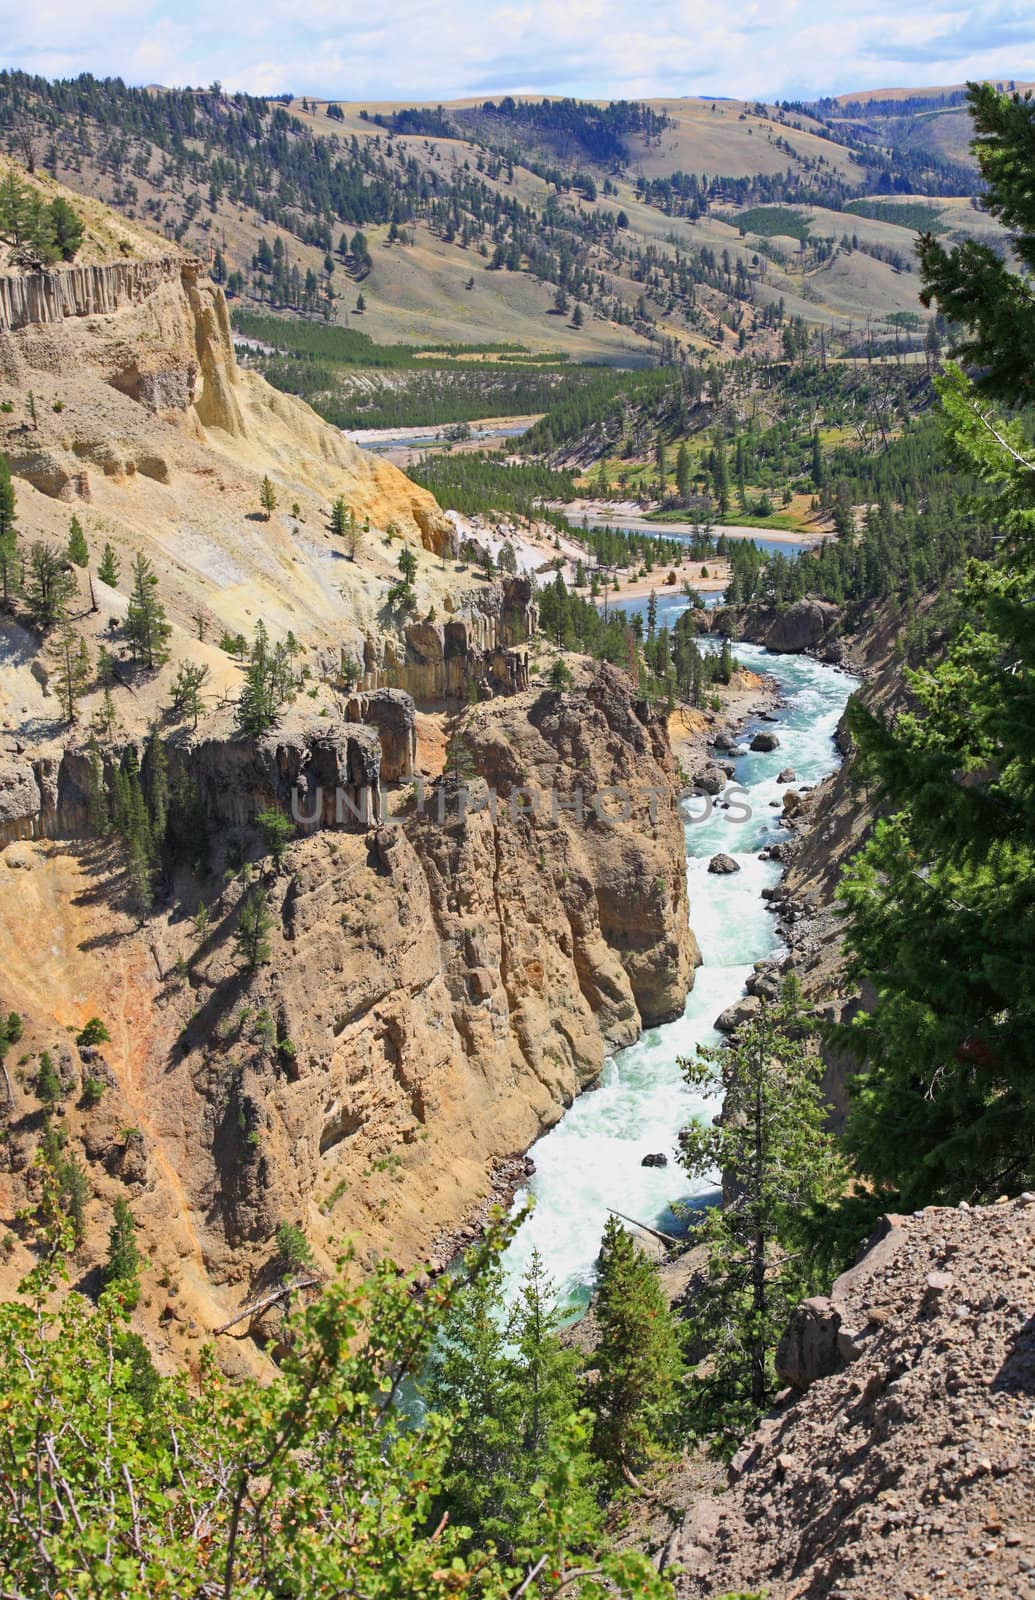 The Yellowstone River in Yellowstone National Park in Wyoming 